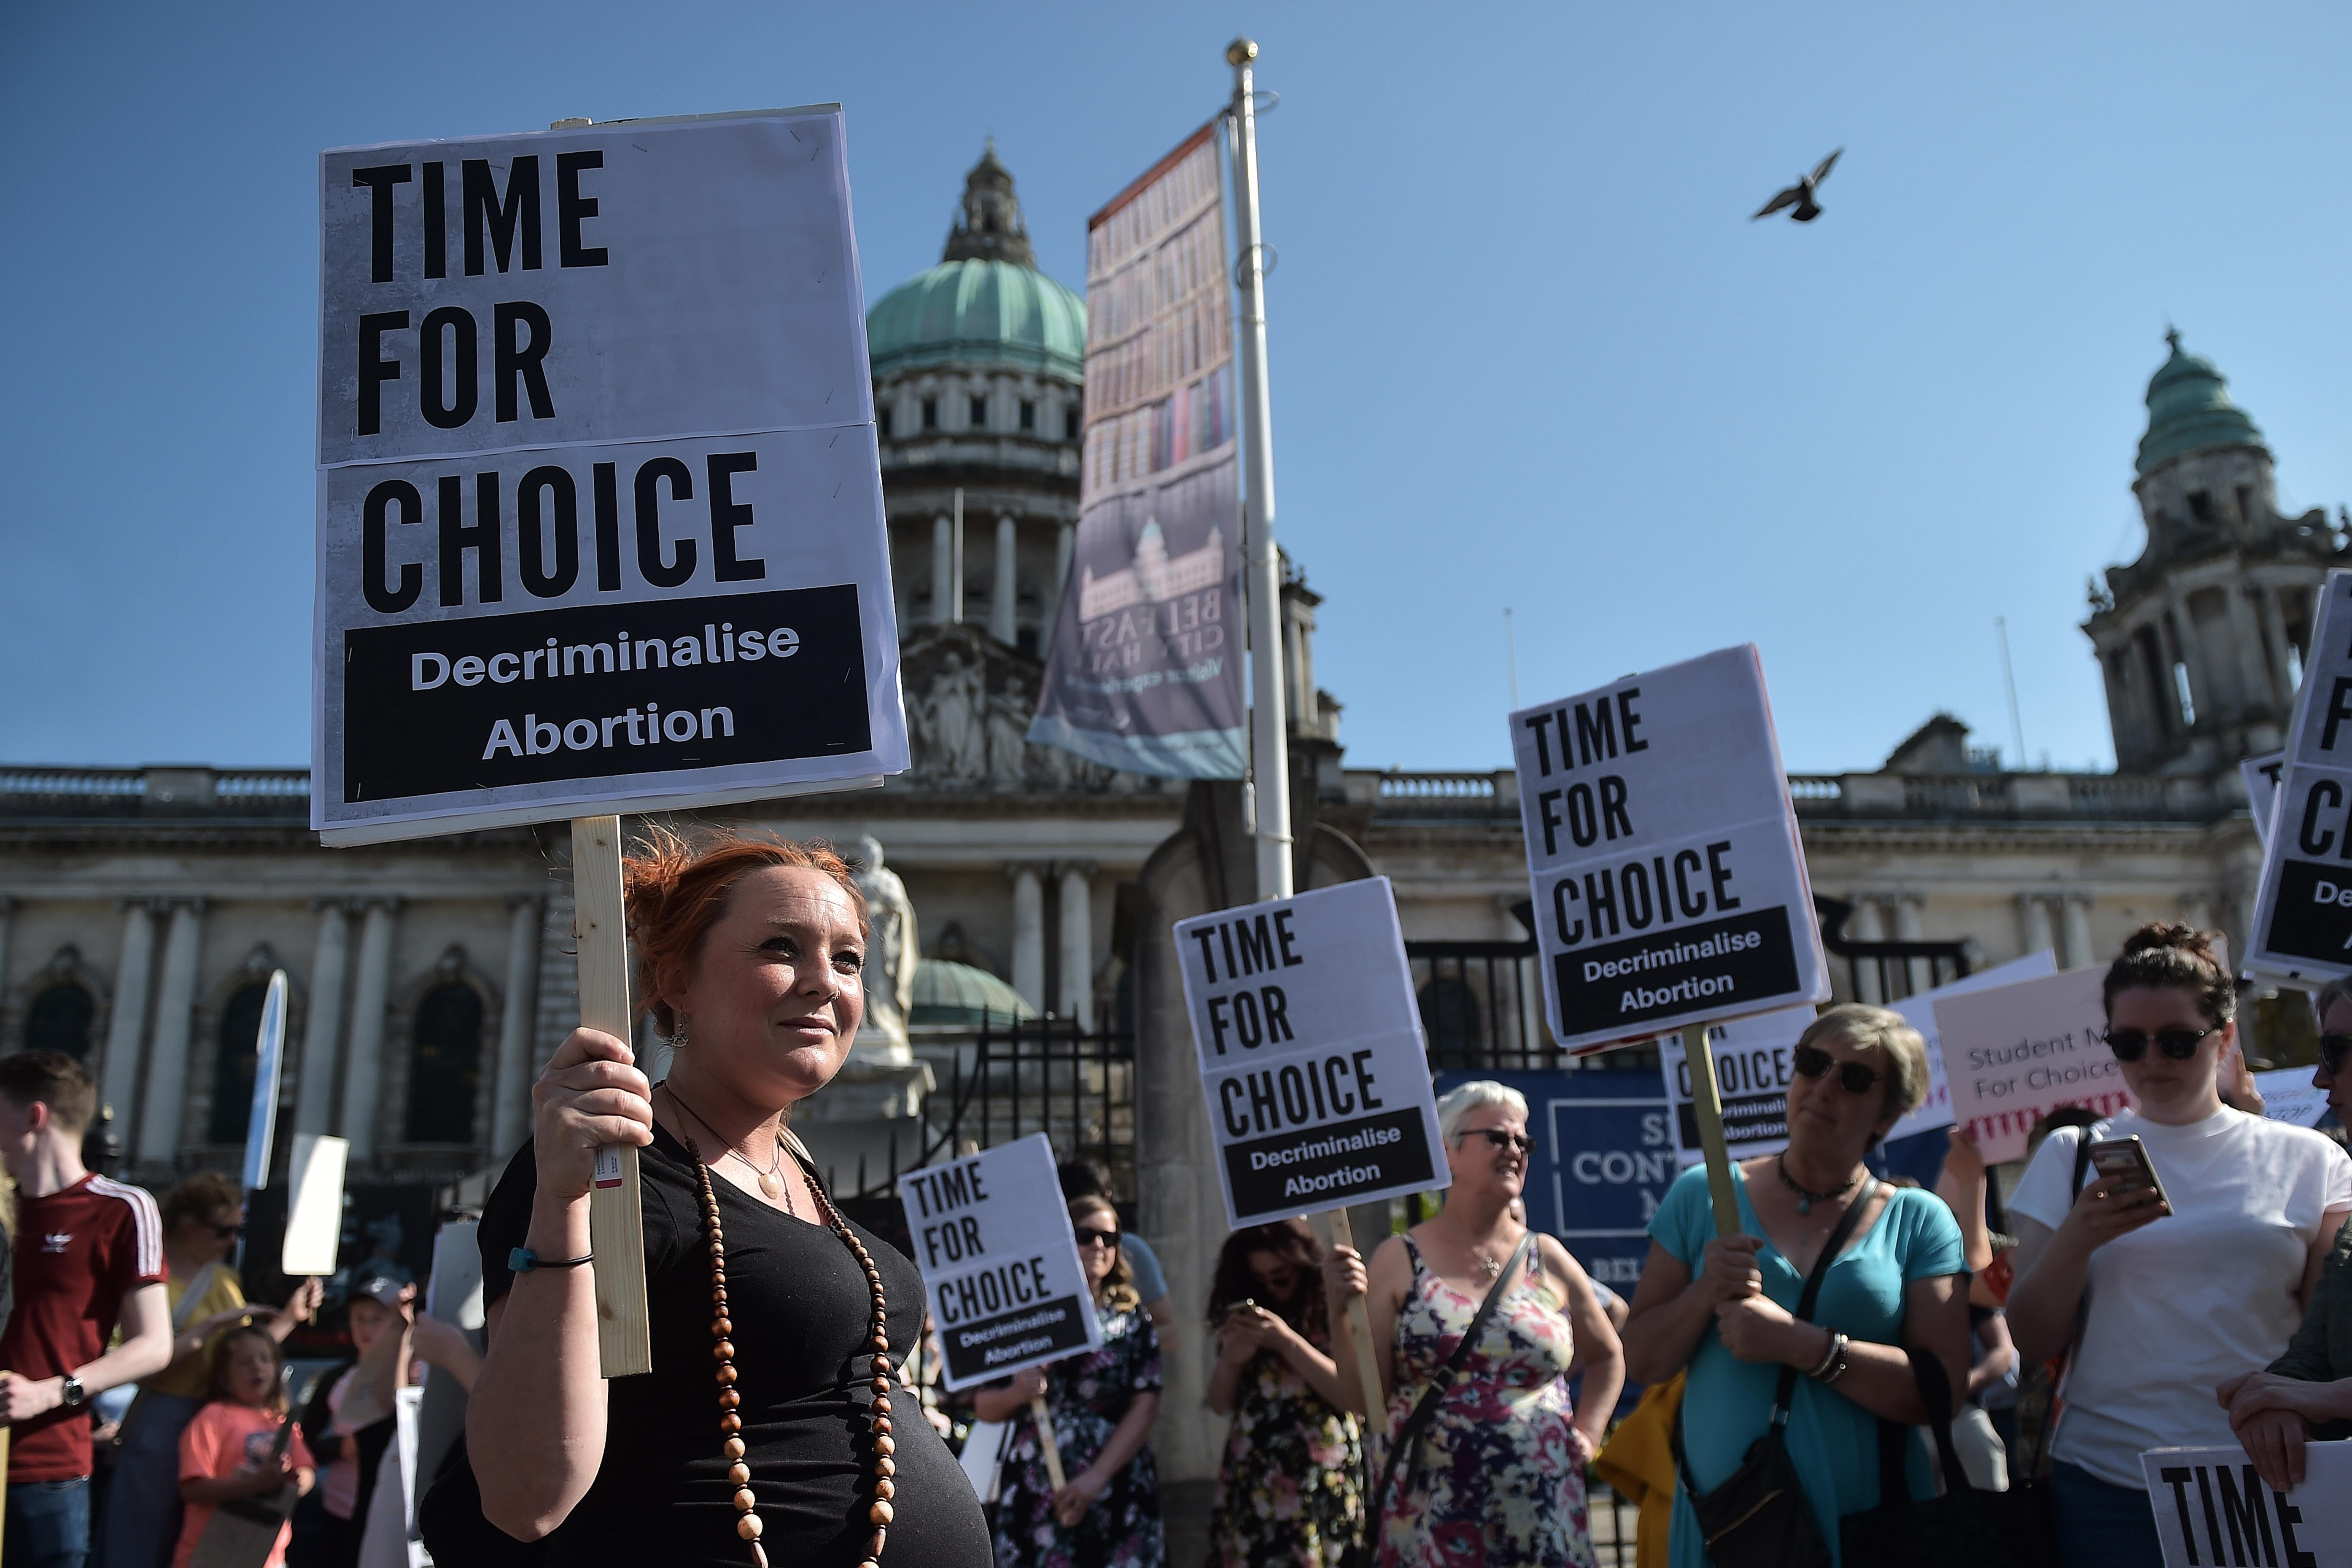 Protesters hold signs saying, "Time for Choice. Decriminalise Abortion."